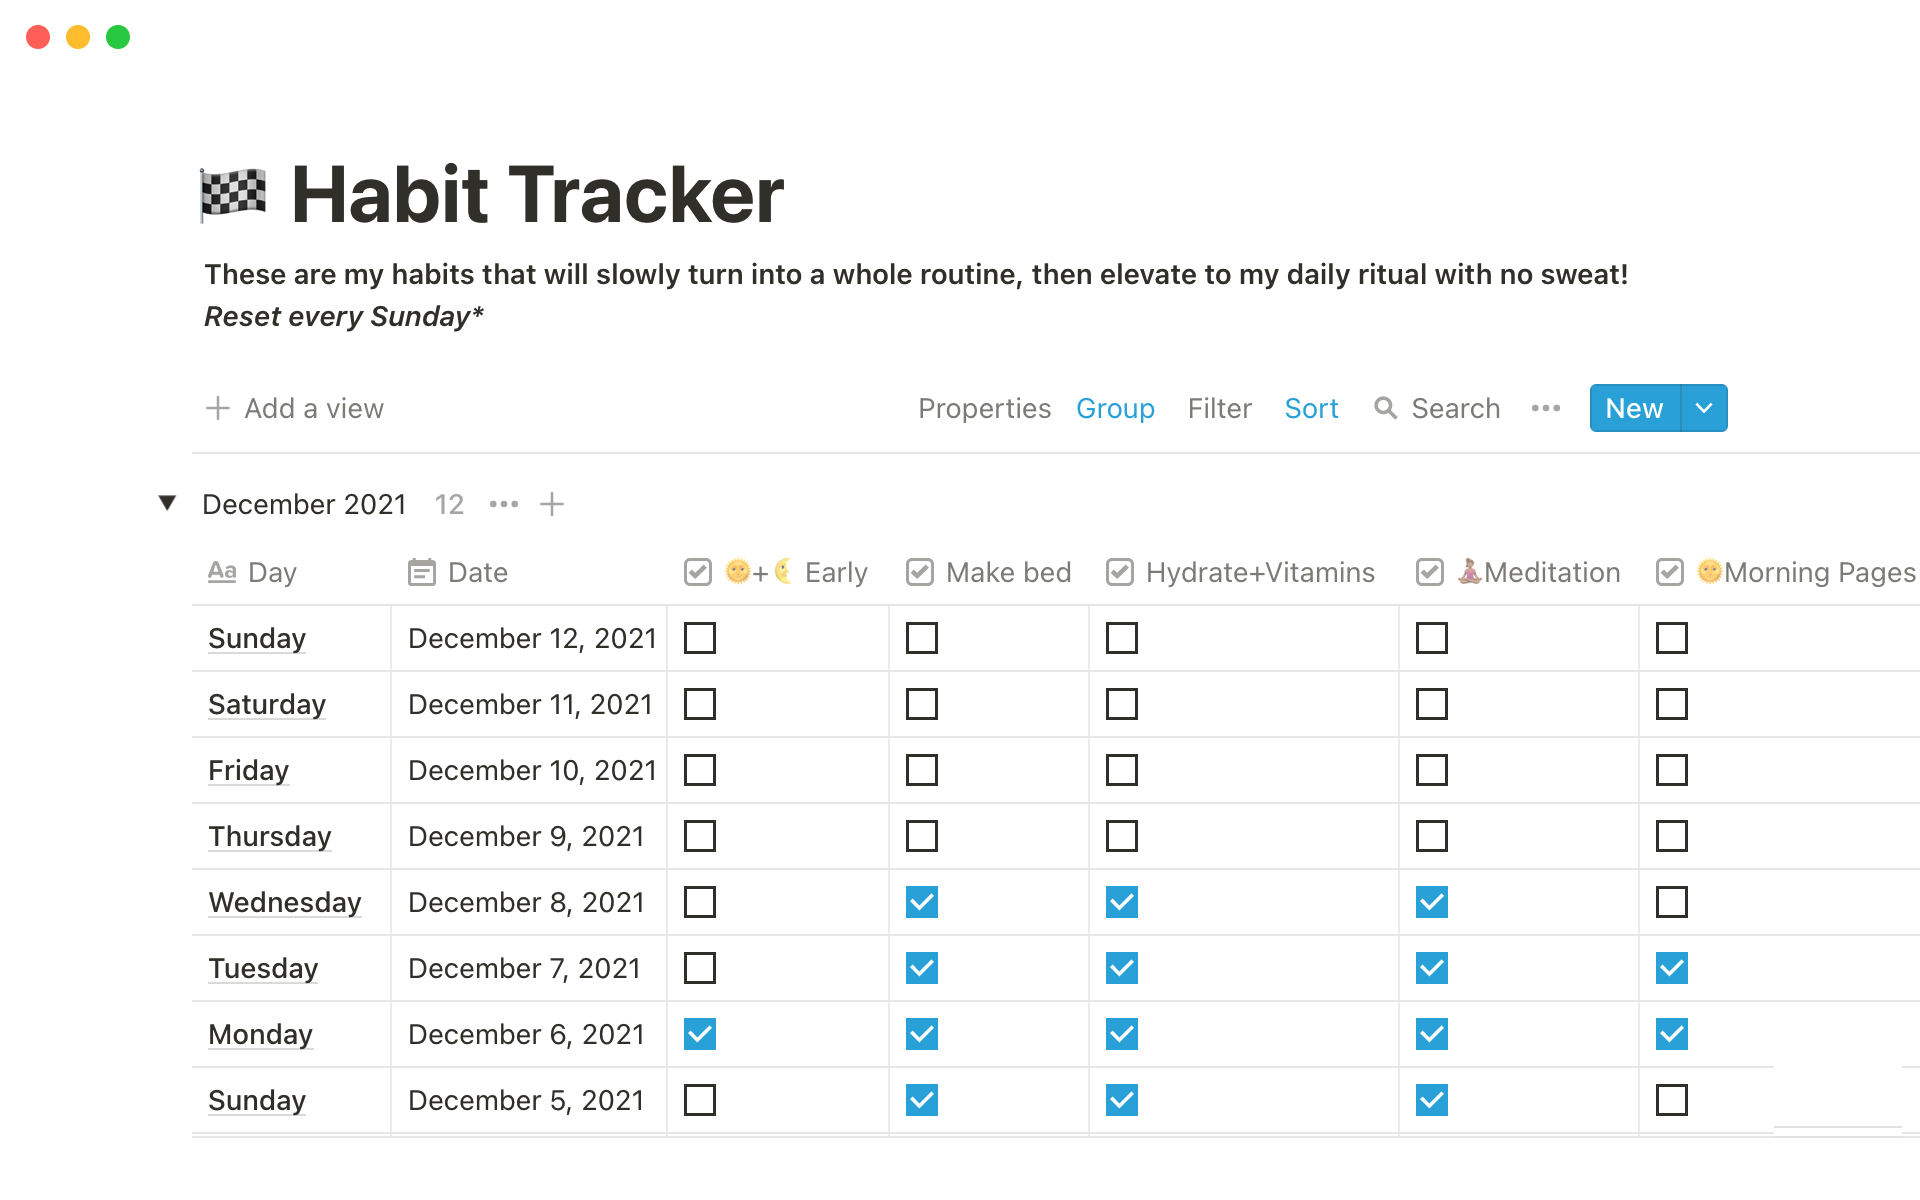 Break down individual habits on a daily basis or by month to track your healthy routines easily.